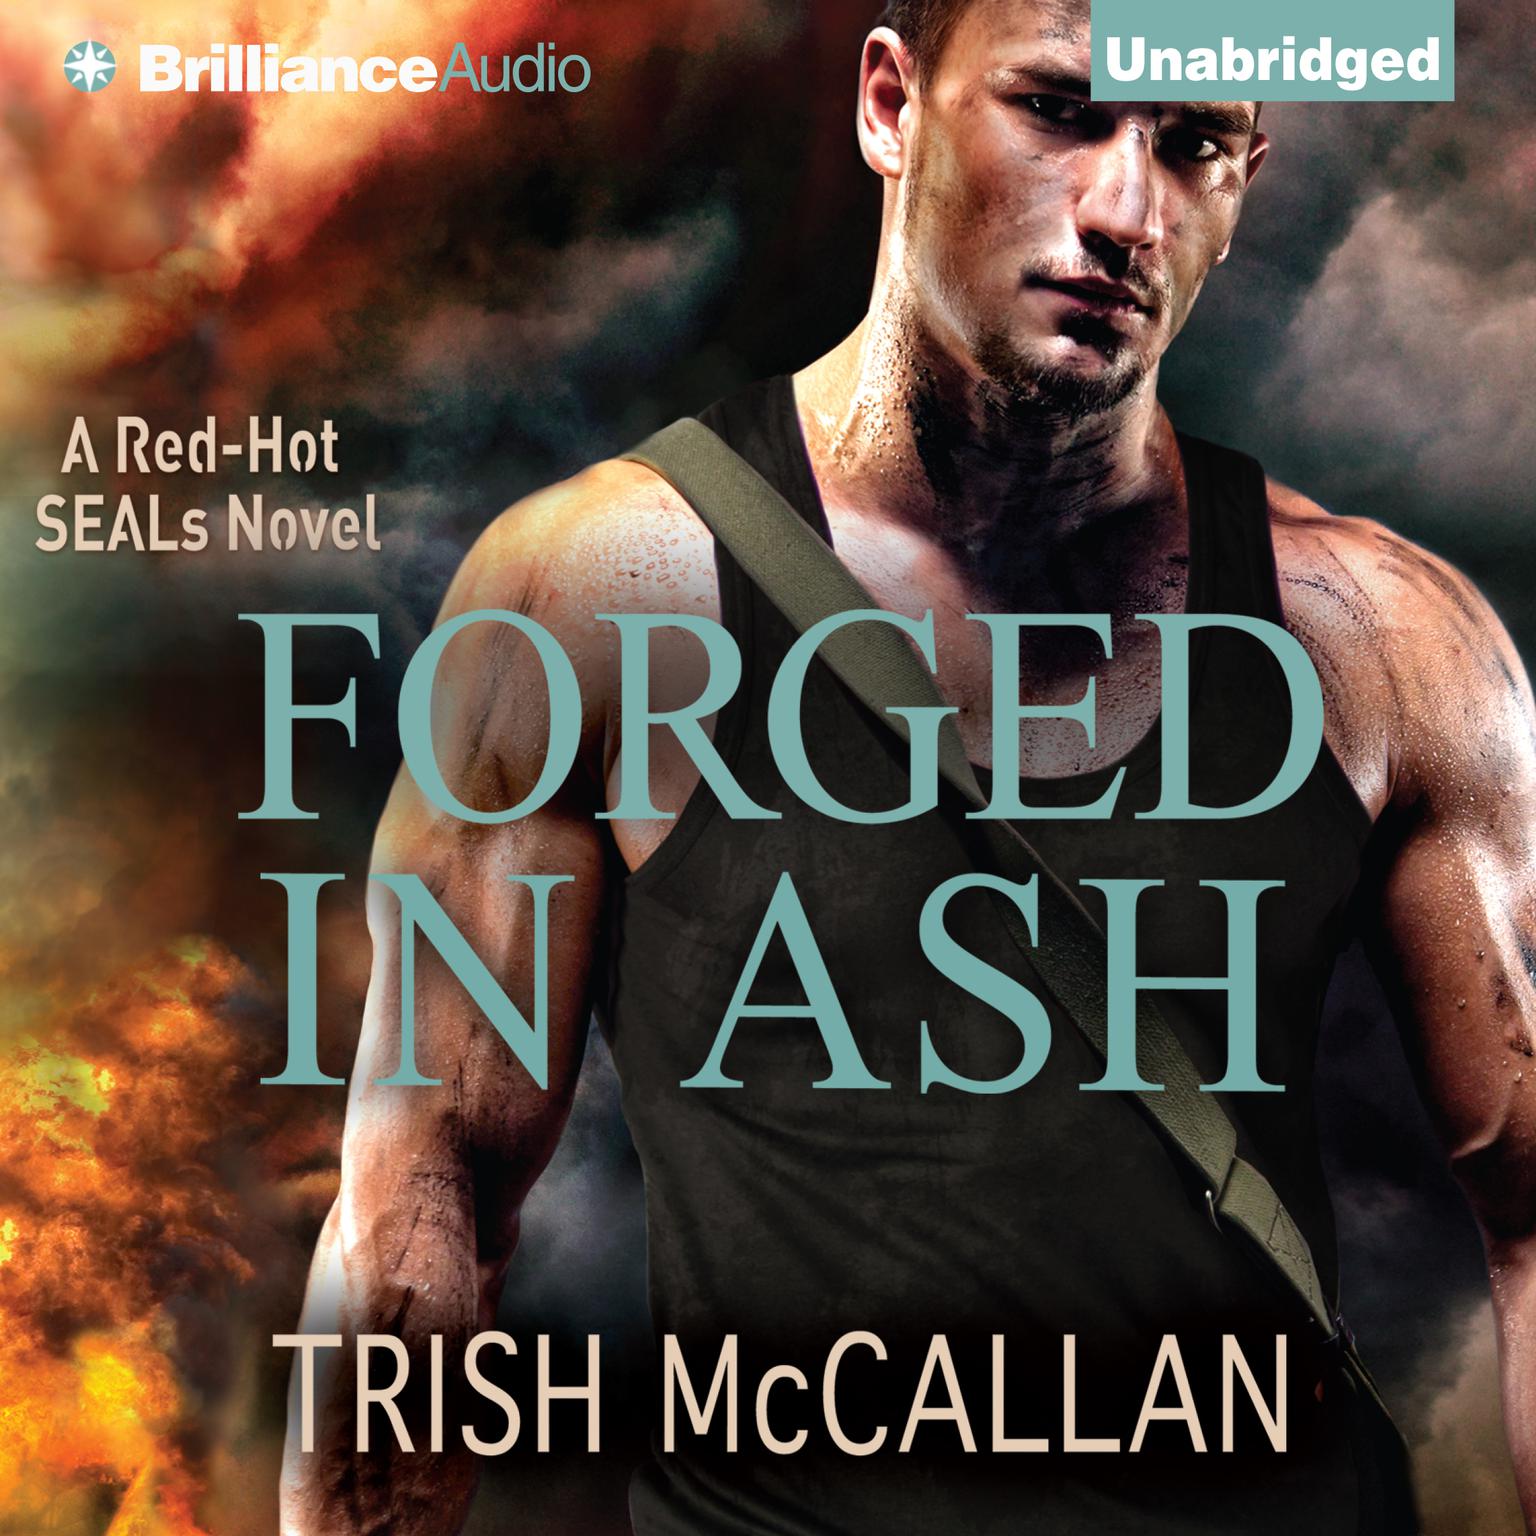 Forged in Ash: A Red-Hot SEALs Novel Audiobook, by Trish McCallan